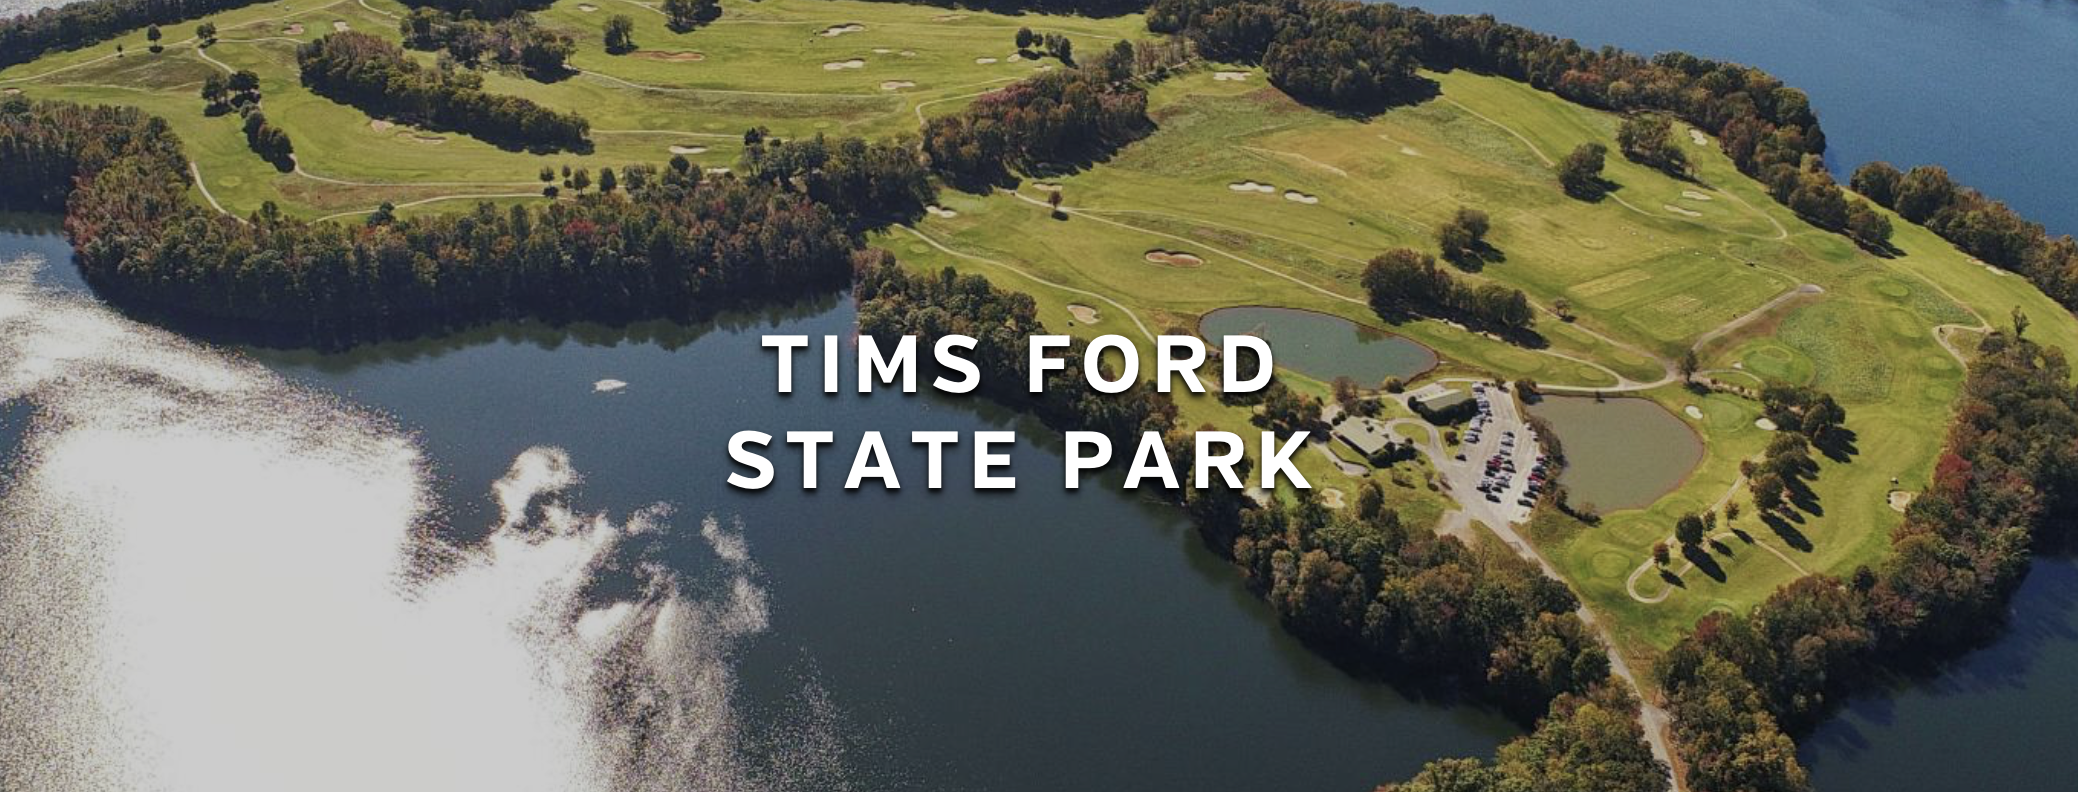 Tims Ford State Park Campground